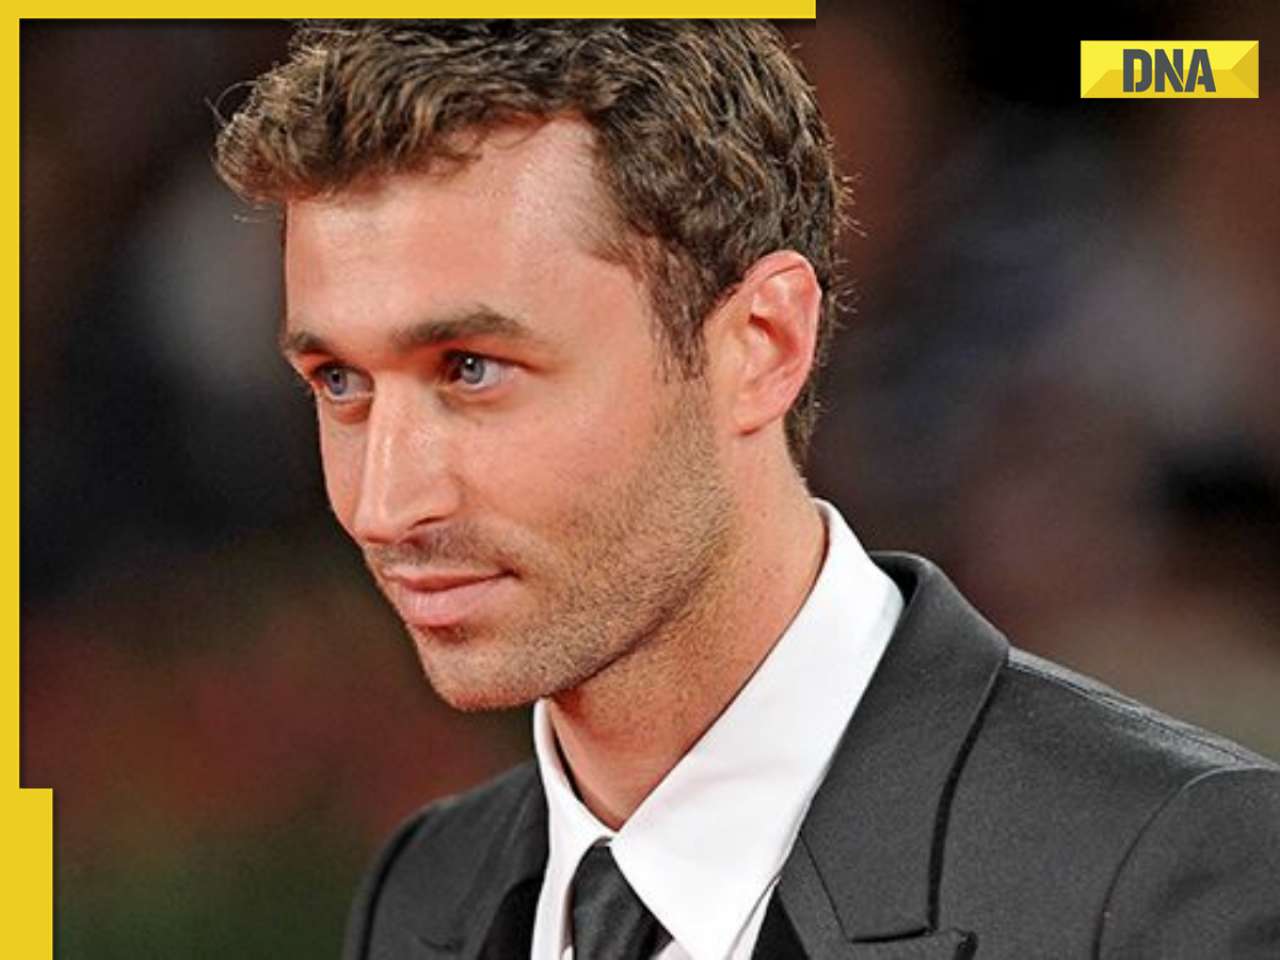 Who was adult star James Deen, whose reputation crumbled after rape allegations?